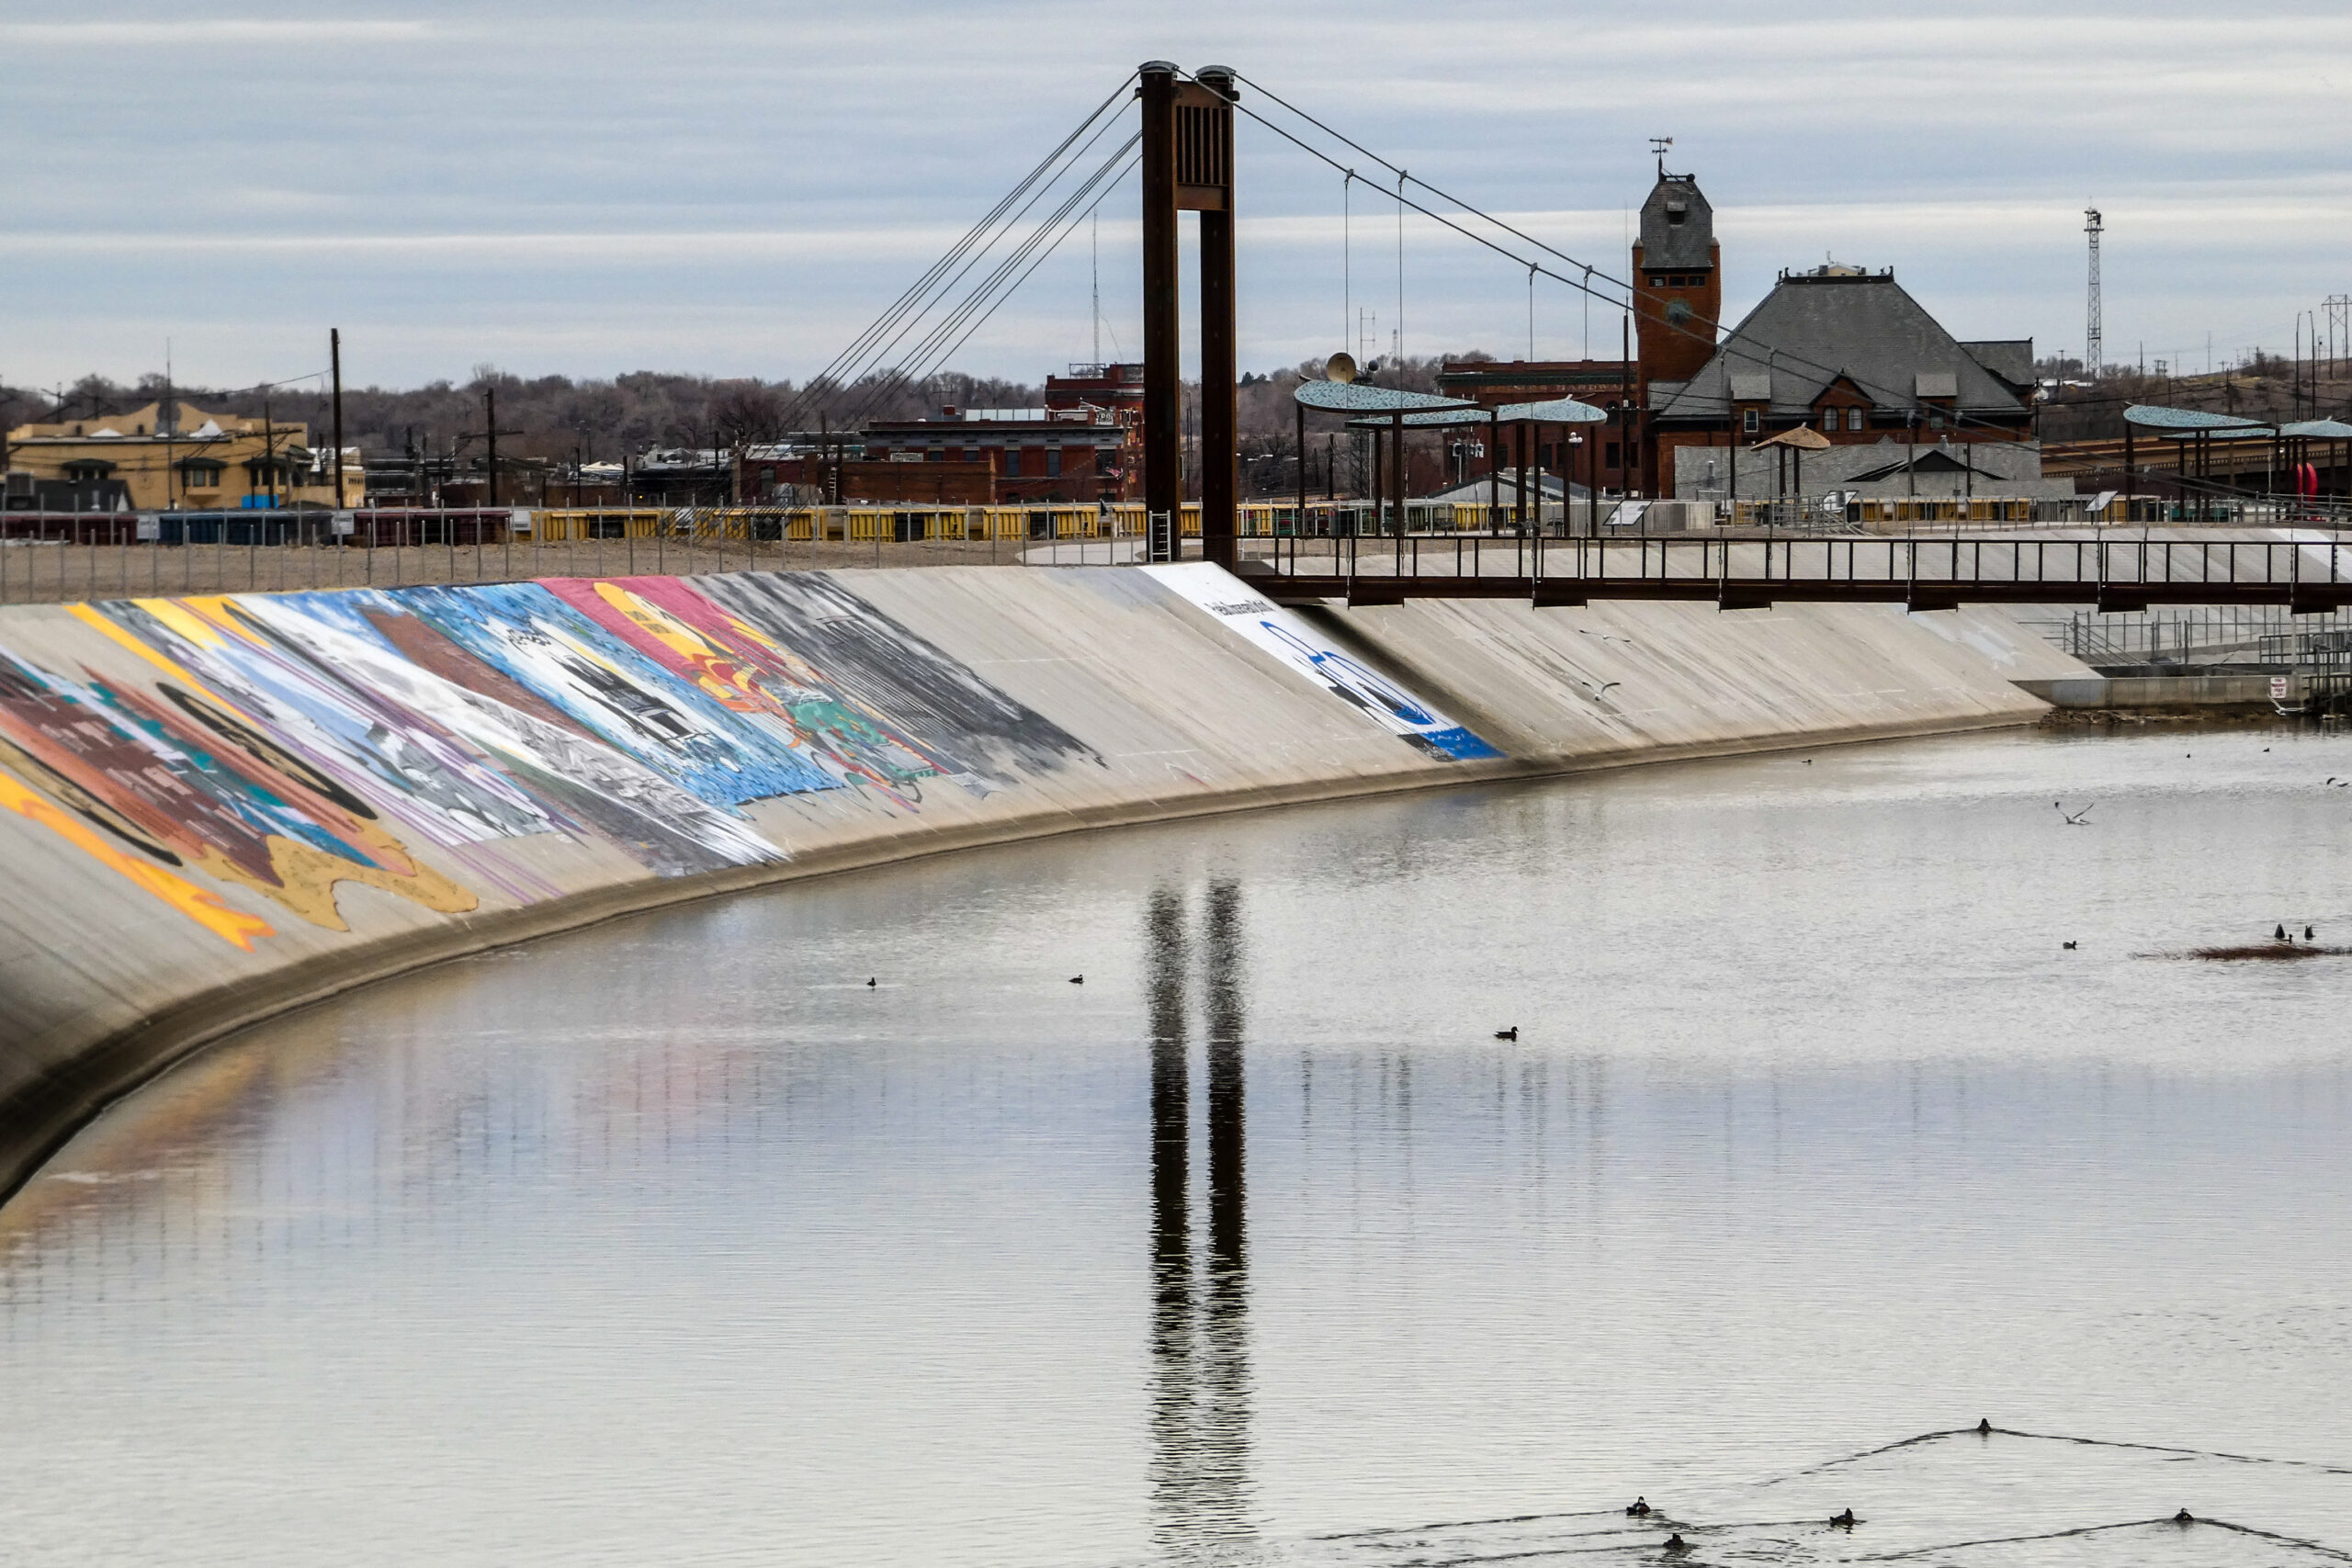 Colorado history themed murals are among these painted on the Arkansas River levee near a pedestrian bridge in Pueblo. (Dec. 28, 2022)